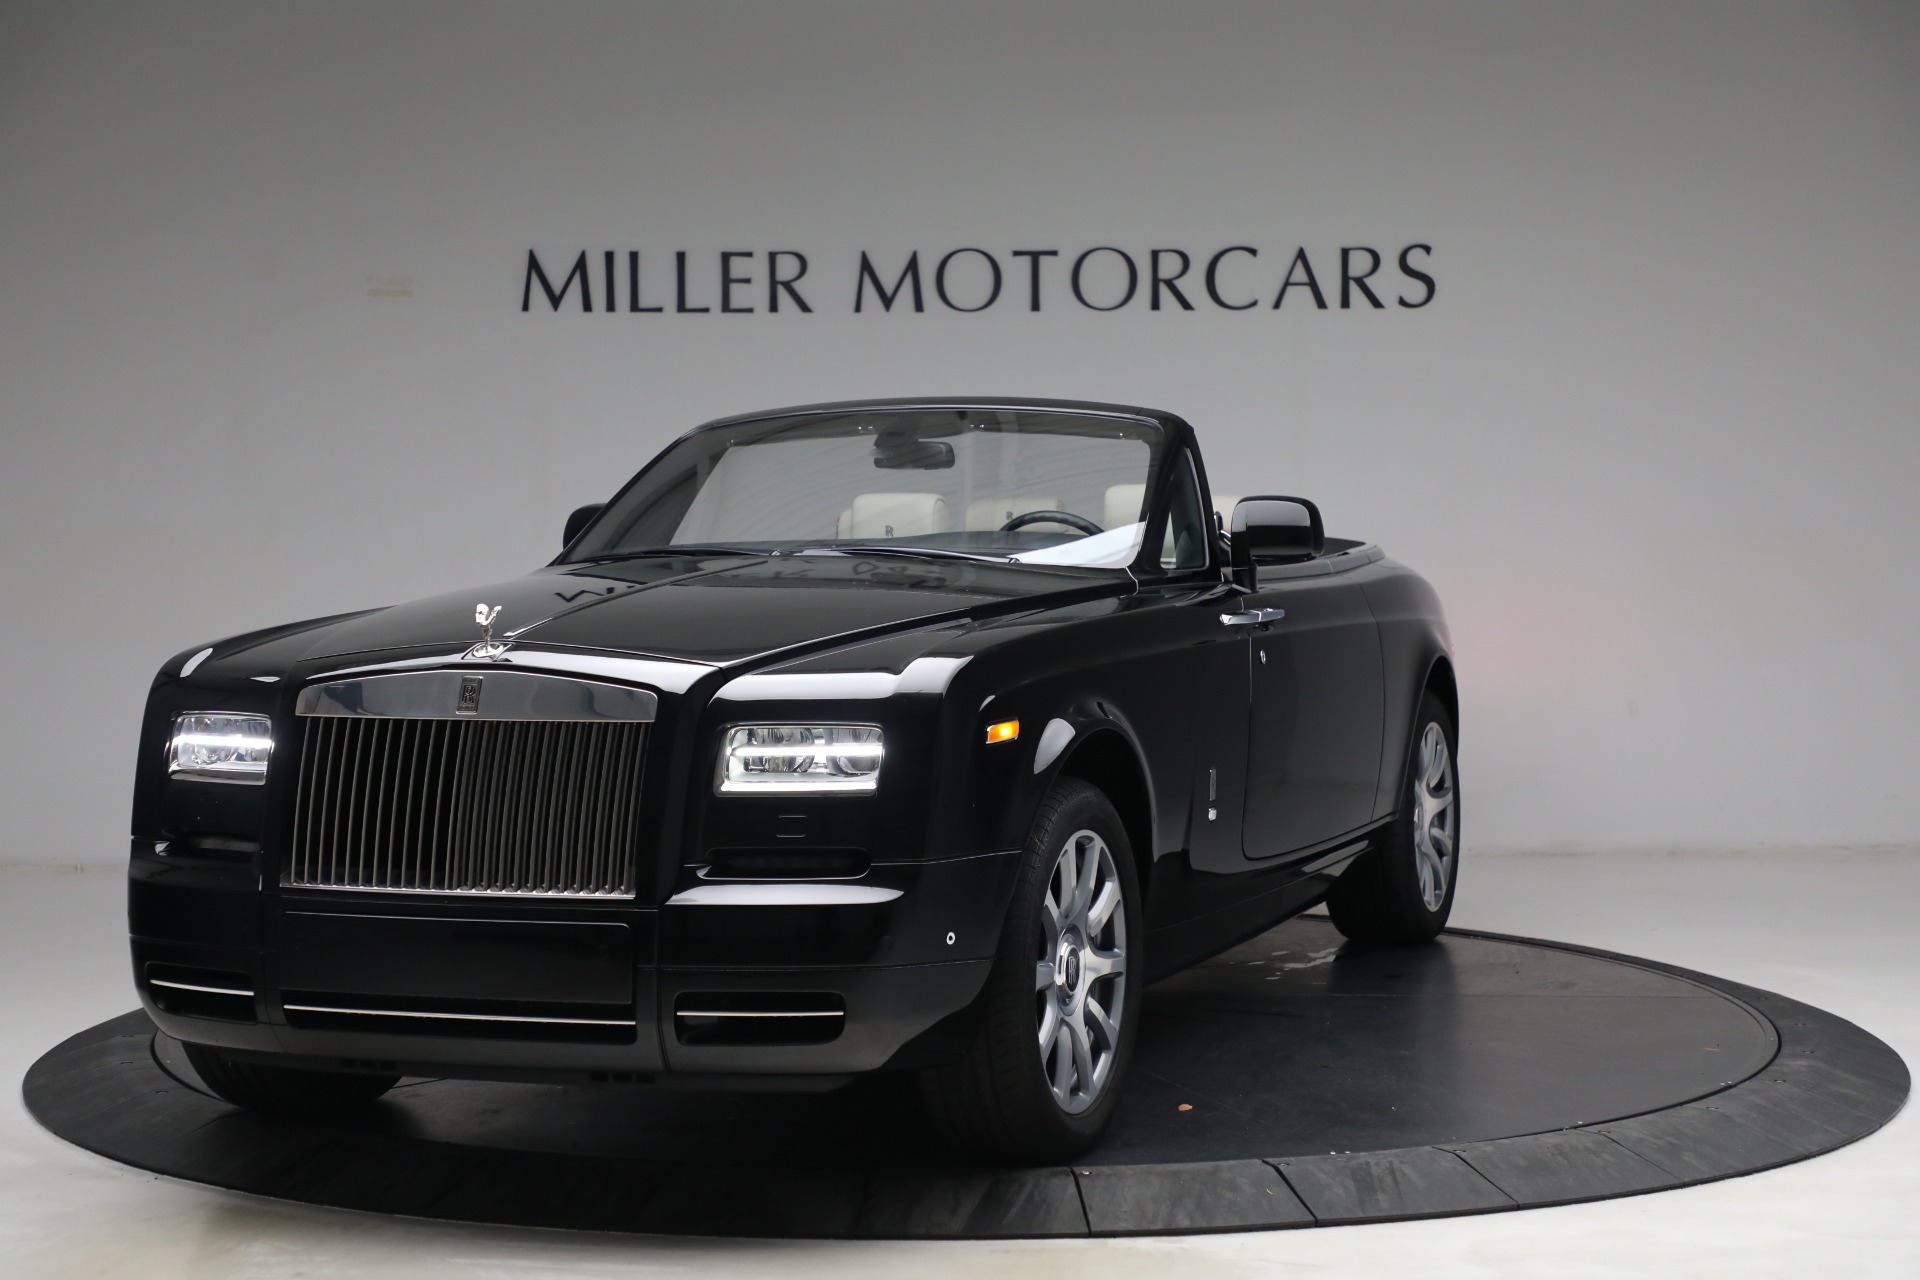 Used 2013 Rolls-Royce Phantom Drophead Coupe for sale Sold at Bugatti of Greenwich in Greenwich CT 06830 1